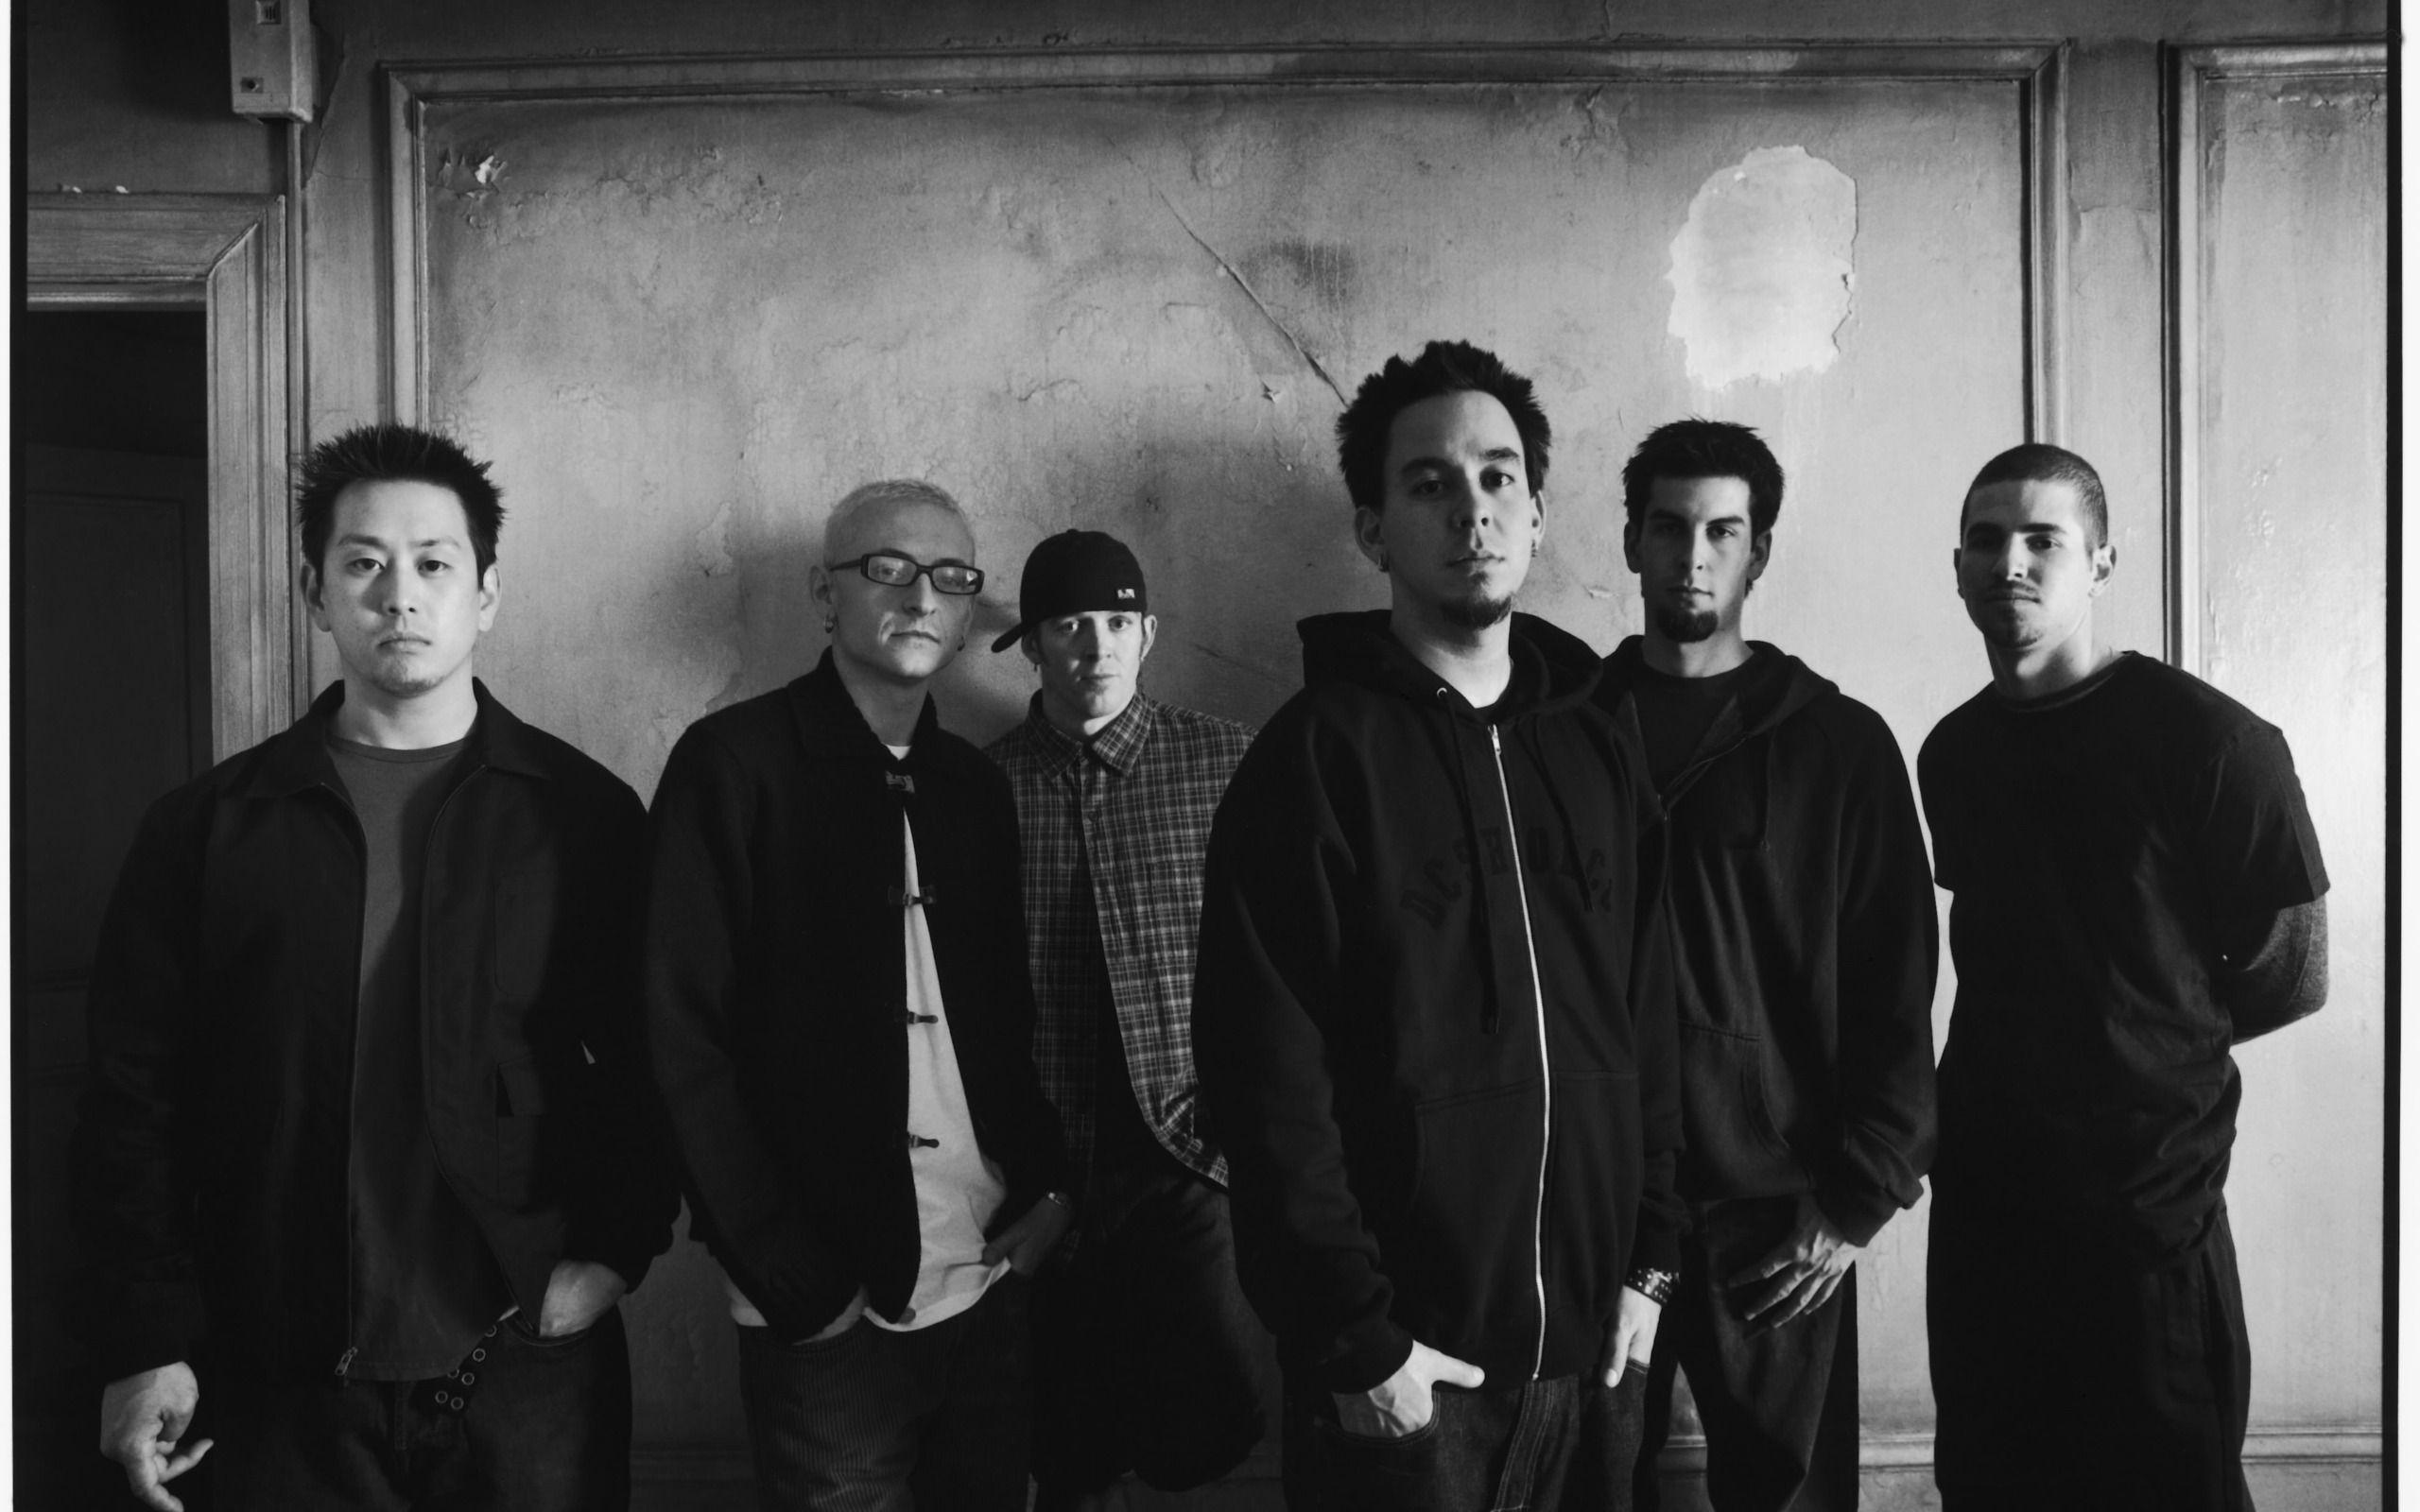 Musicians of group Linkin Park wallpaper and image